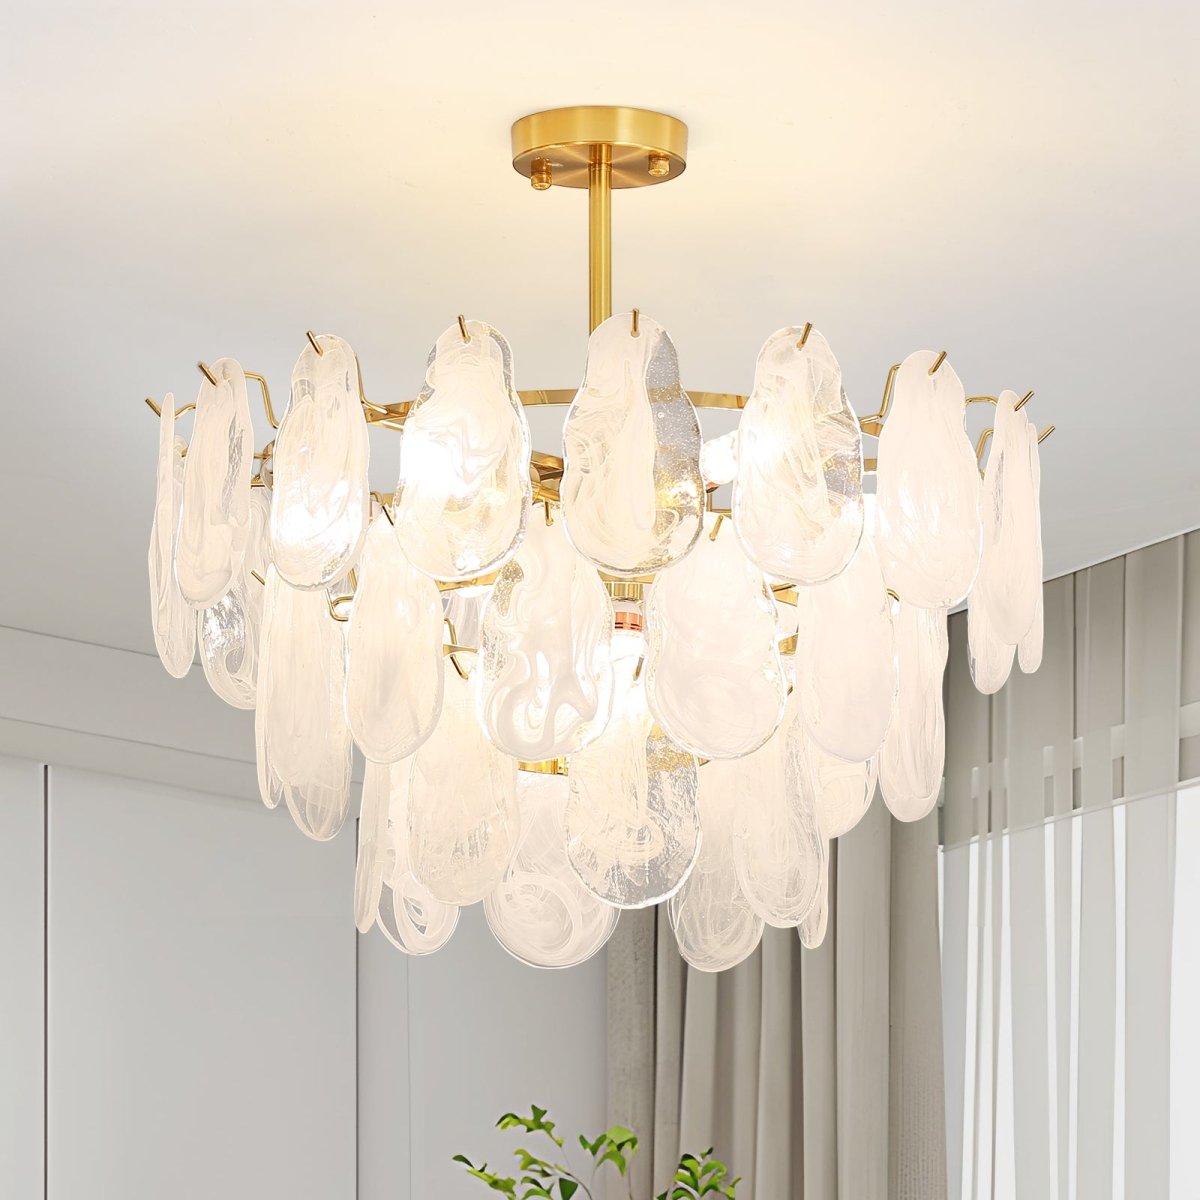 6-Light Modern Semi Flush Mount Ceiling Light, 20" Crystal Chandelier Ceiling Light Fixtures with 3-Tire Cloud Glass Lampshade for Bedroom, Included 6 LED Bulbs, UL Listed+ - WS-FPC53-D500-6C3 1 | DEPULEY